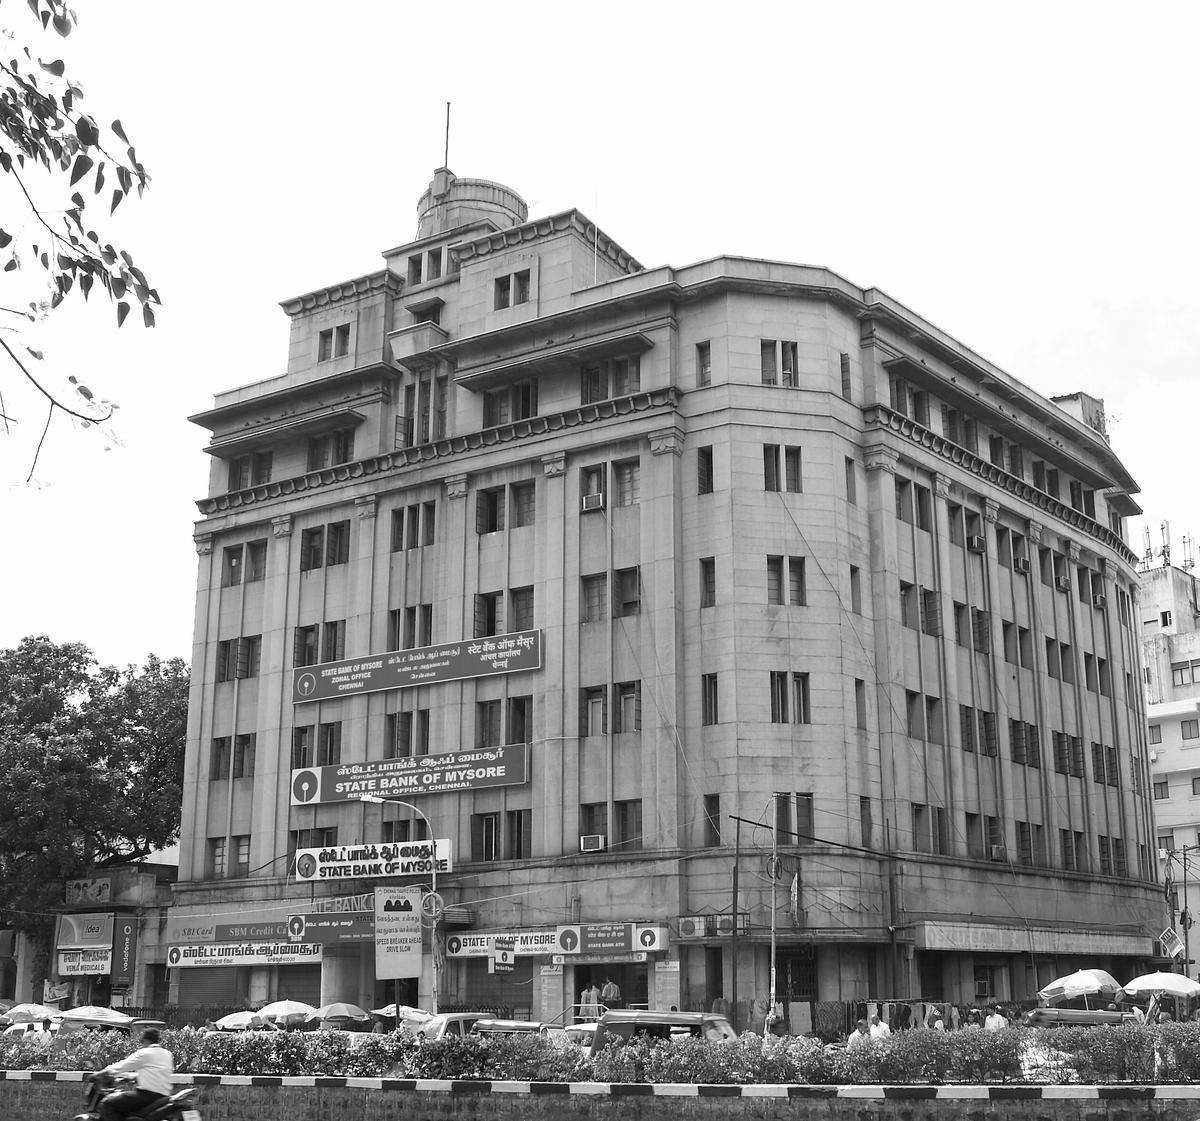 The building of the State Bank of Mysore in Chennai